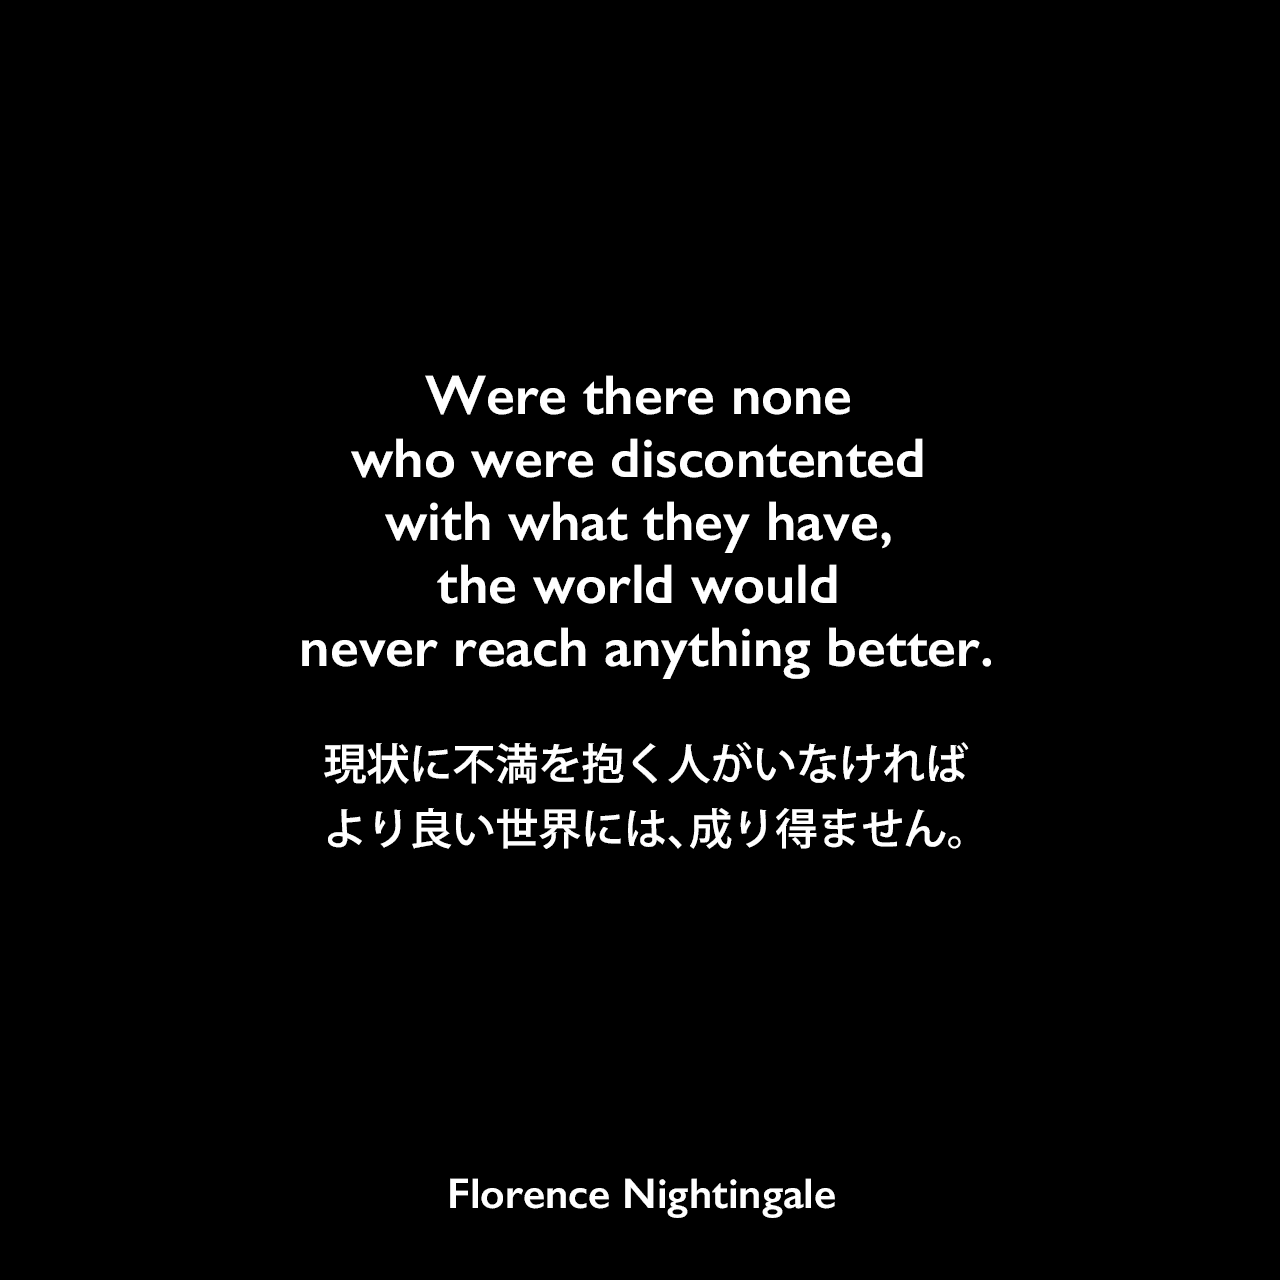 Were there none who were discontented with what they have, the world would never reach anything better.持っているものに不満を抱く人がいなければ、世界はより良いものには、決してたどり着きません。着きません。- ナイチンゲールの本「Cassandra and other selections from Suggestions for thought」よりFlorence Nightingale